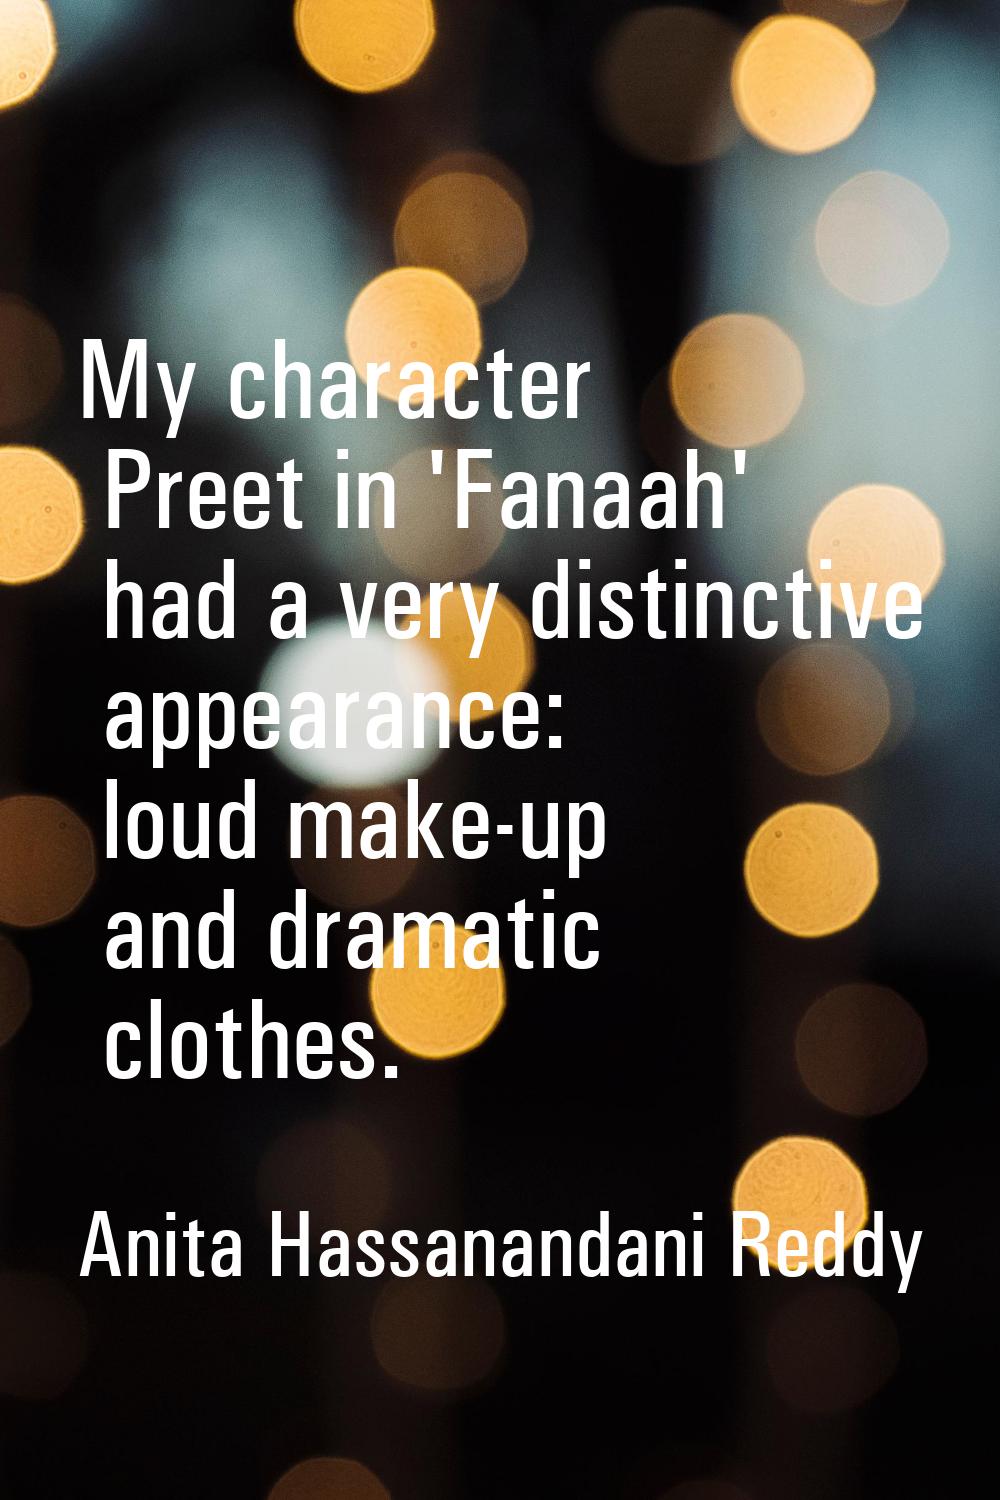 My character Preet in 'Fanaah' had a very distinctive appearance: loud make-up and dramatic clothes